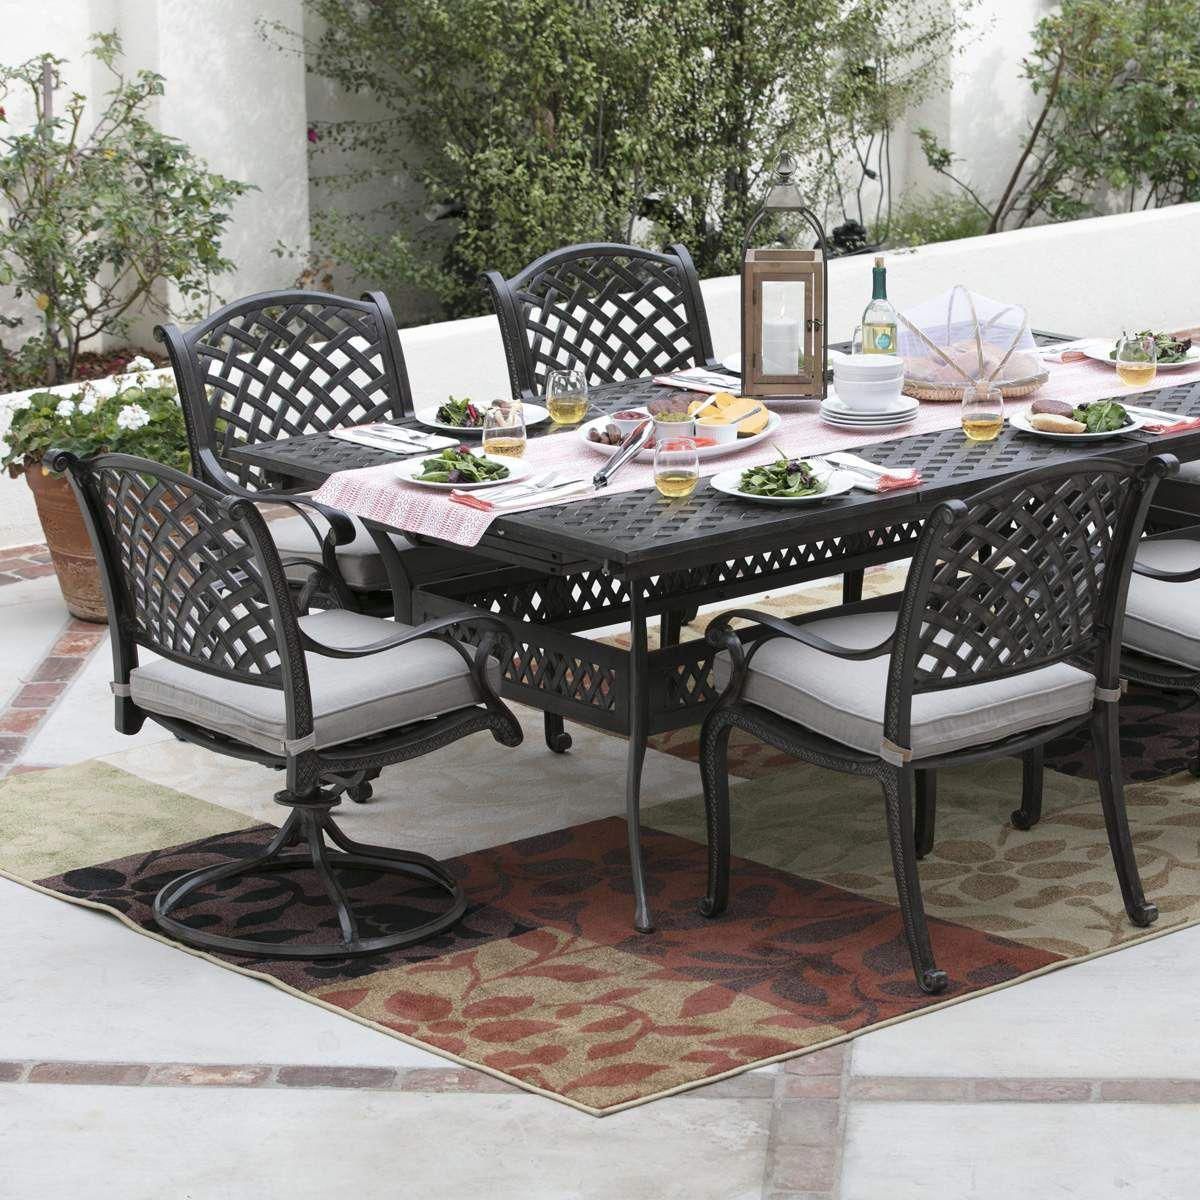 Most Durable Outdoor Dining Table | Ricetta ed ingredienti dei ...